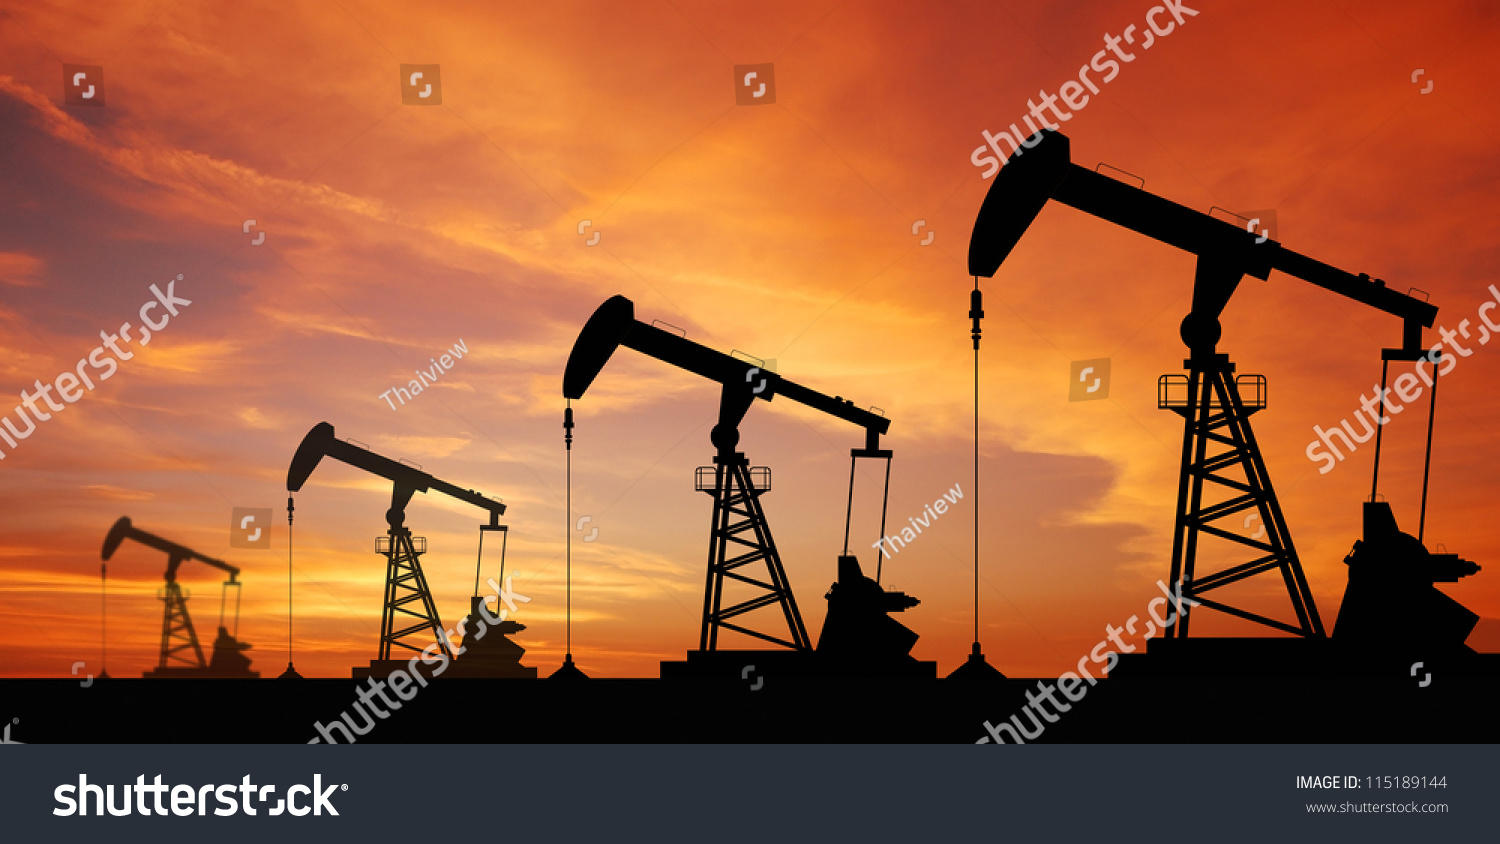 Oil pump oil rig energy industrial machine for petroleum in the sunset background for design #115189144